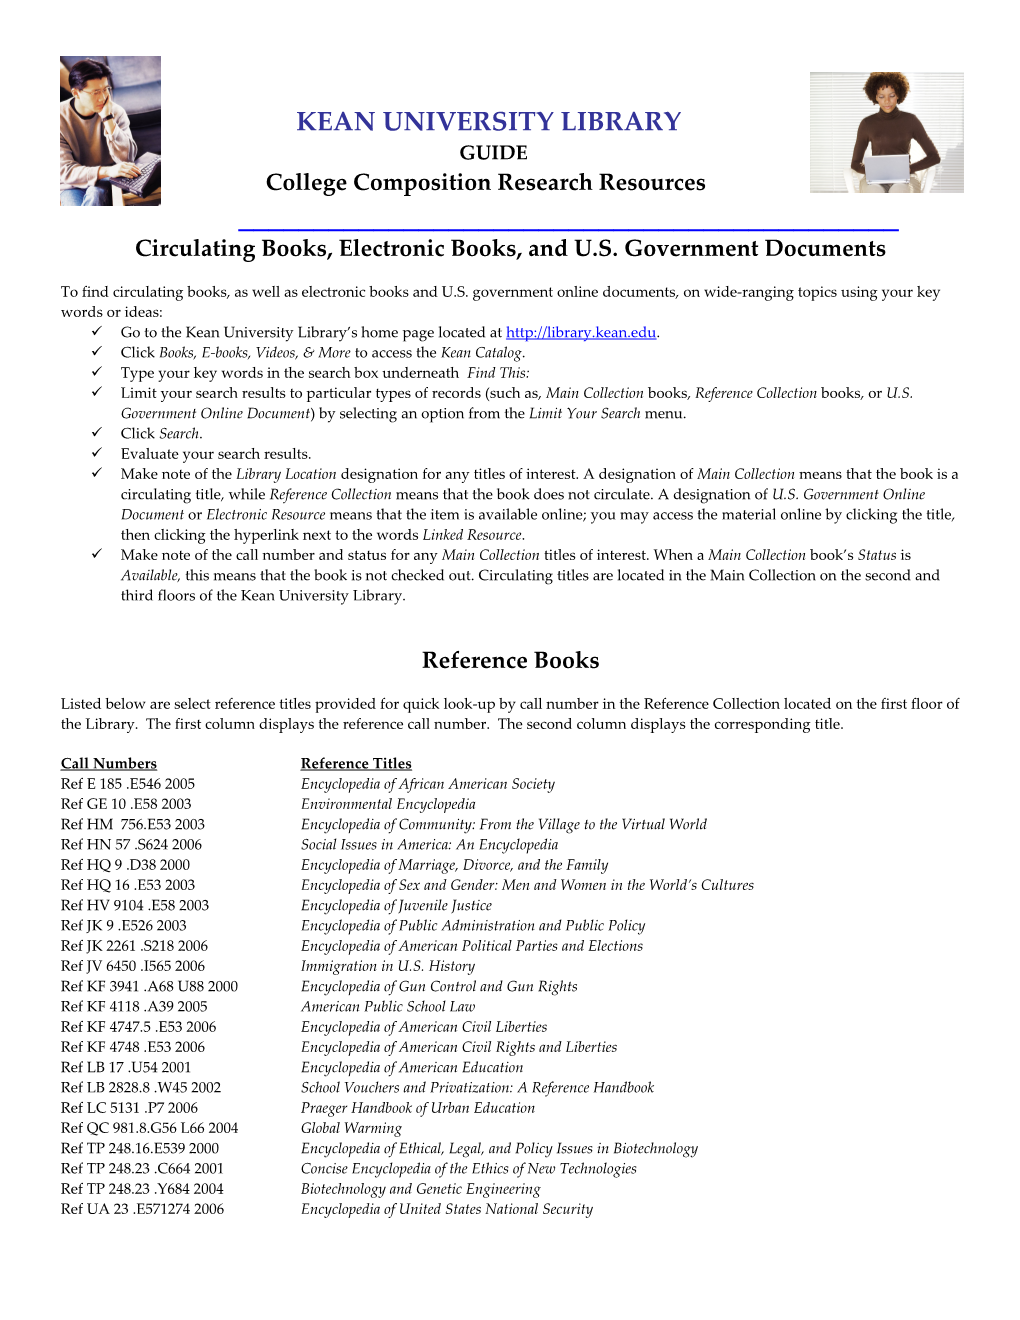 College Composition Research Resources